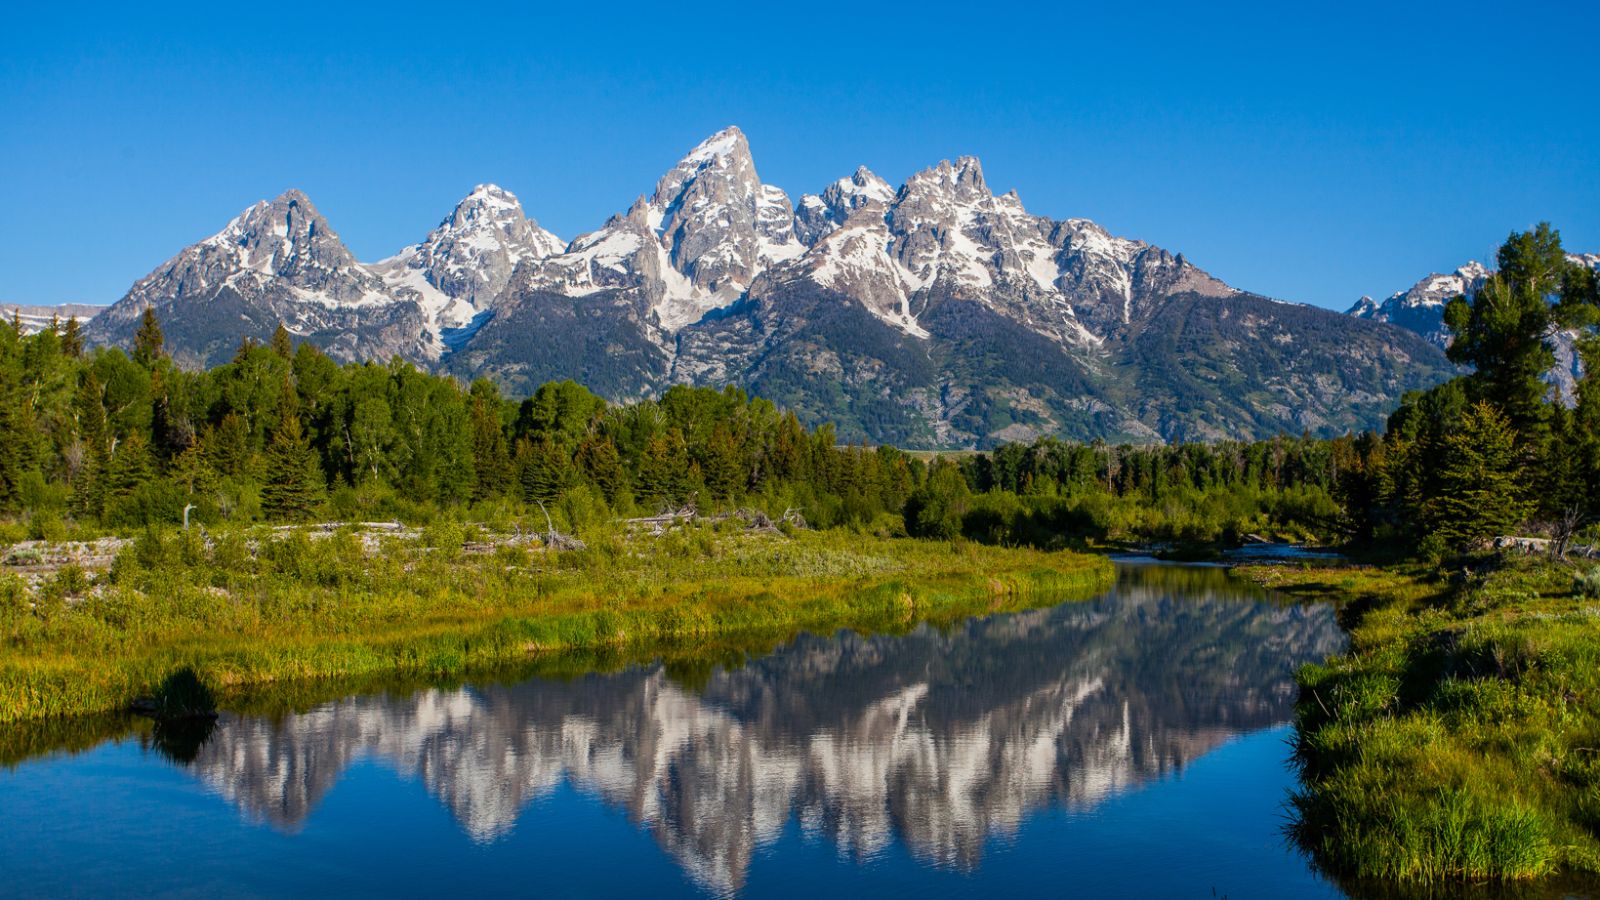 <p>The Grand Tetons are a part of the Rocky Mountains with over 200 miles of hiking trails. You can take part in activities such as bird watching, fishing, climbing, and winter sports. You can pick from six campsites to stay at, giving you ample choices to find the best camping spot.</p>